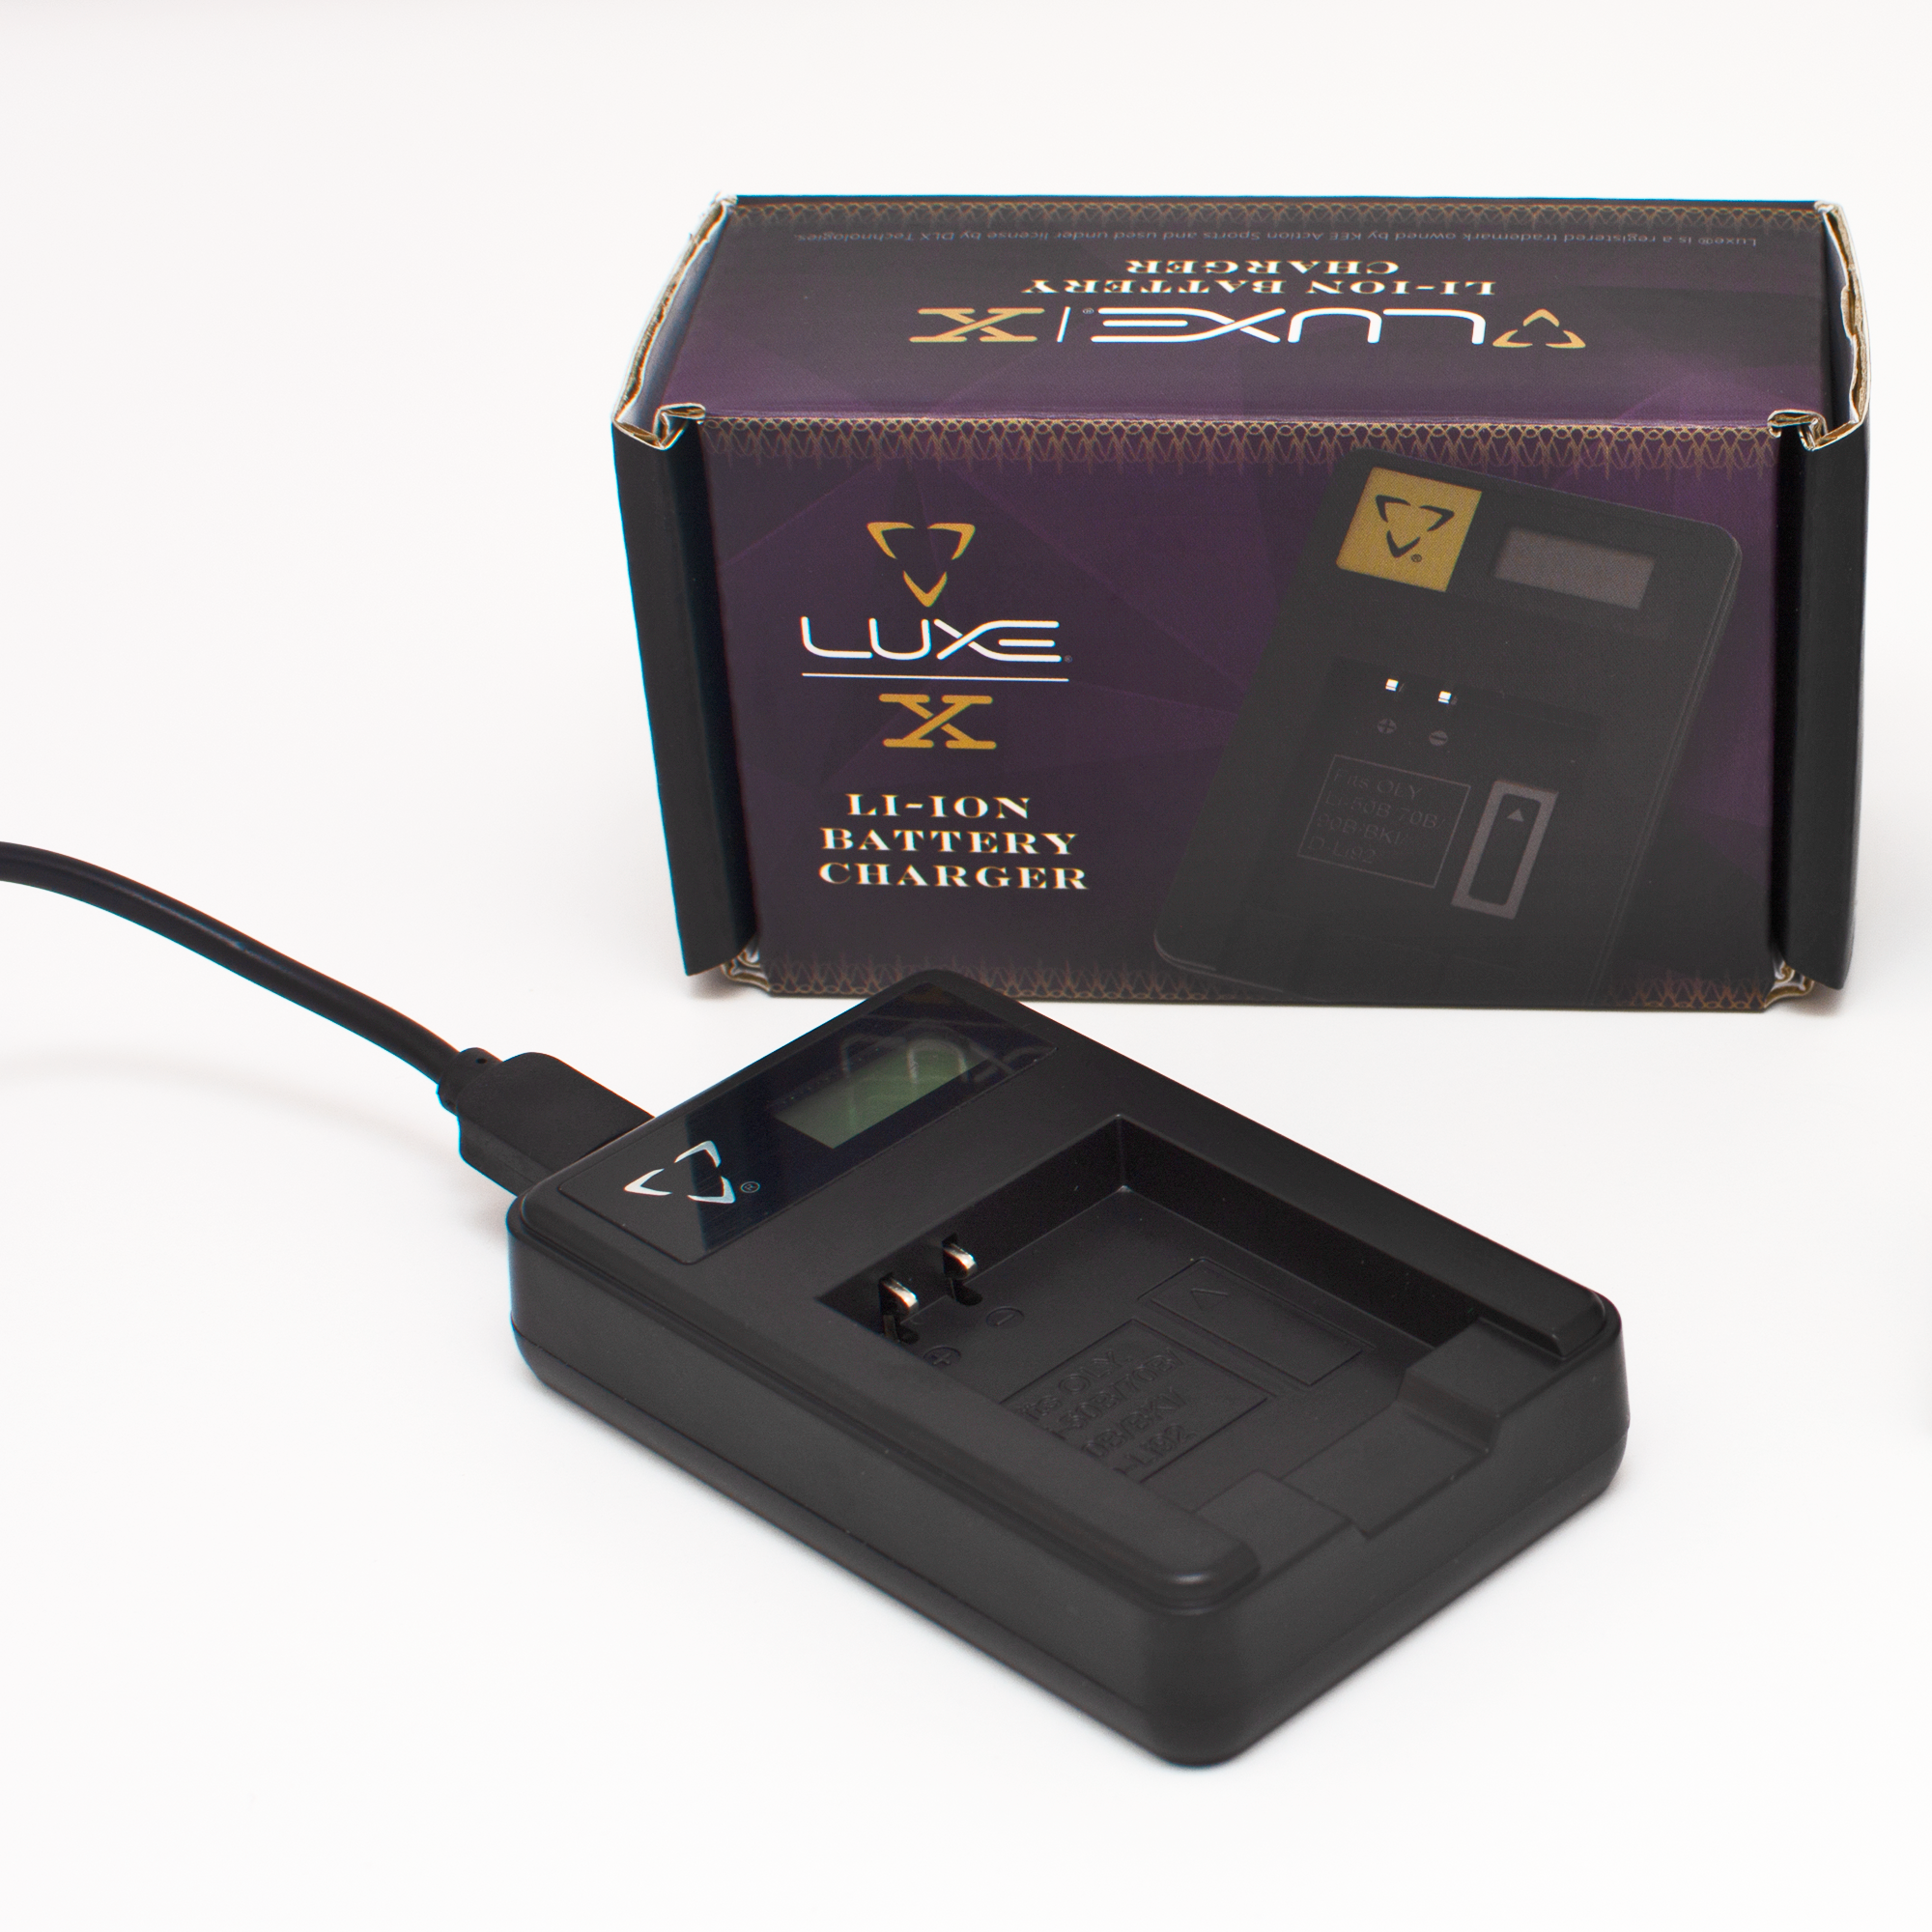 DLX Luxe X External Battery Charger